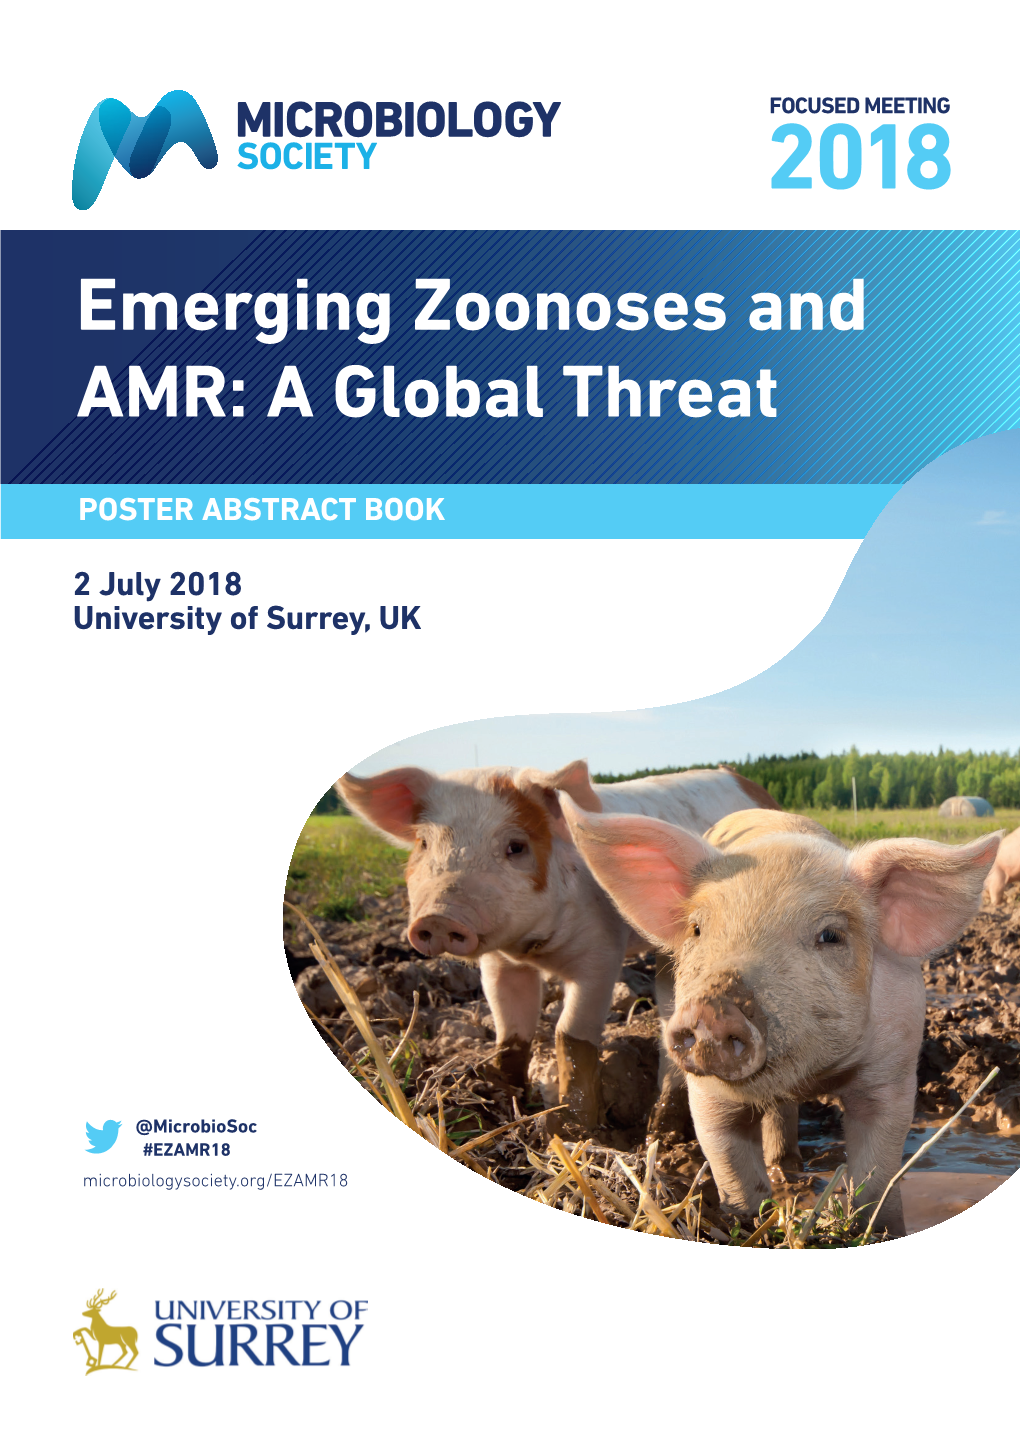 Emerging Zoonoses and AMR: a Global Threat